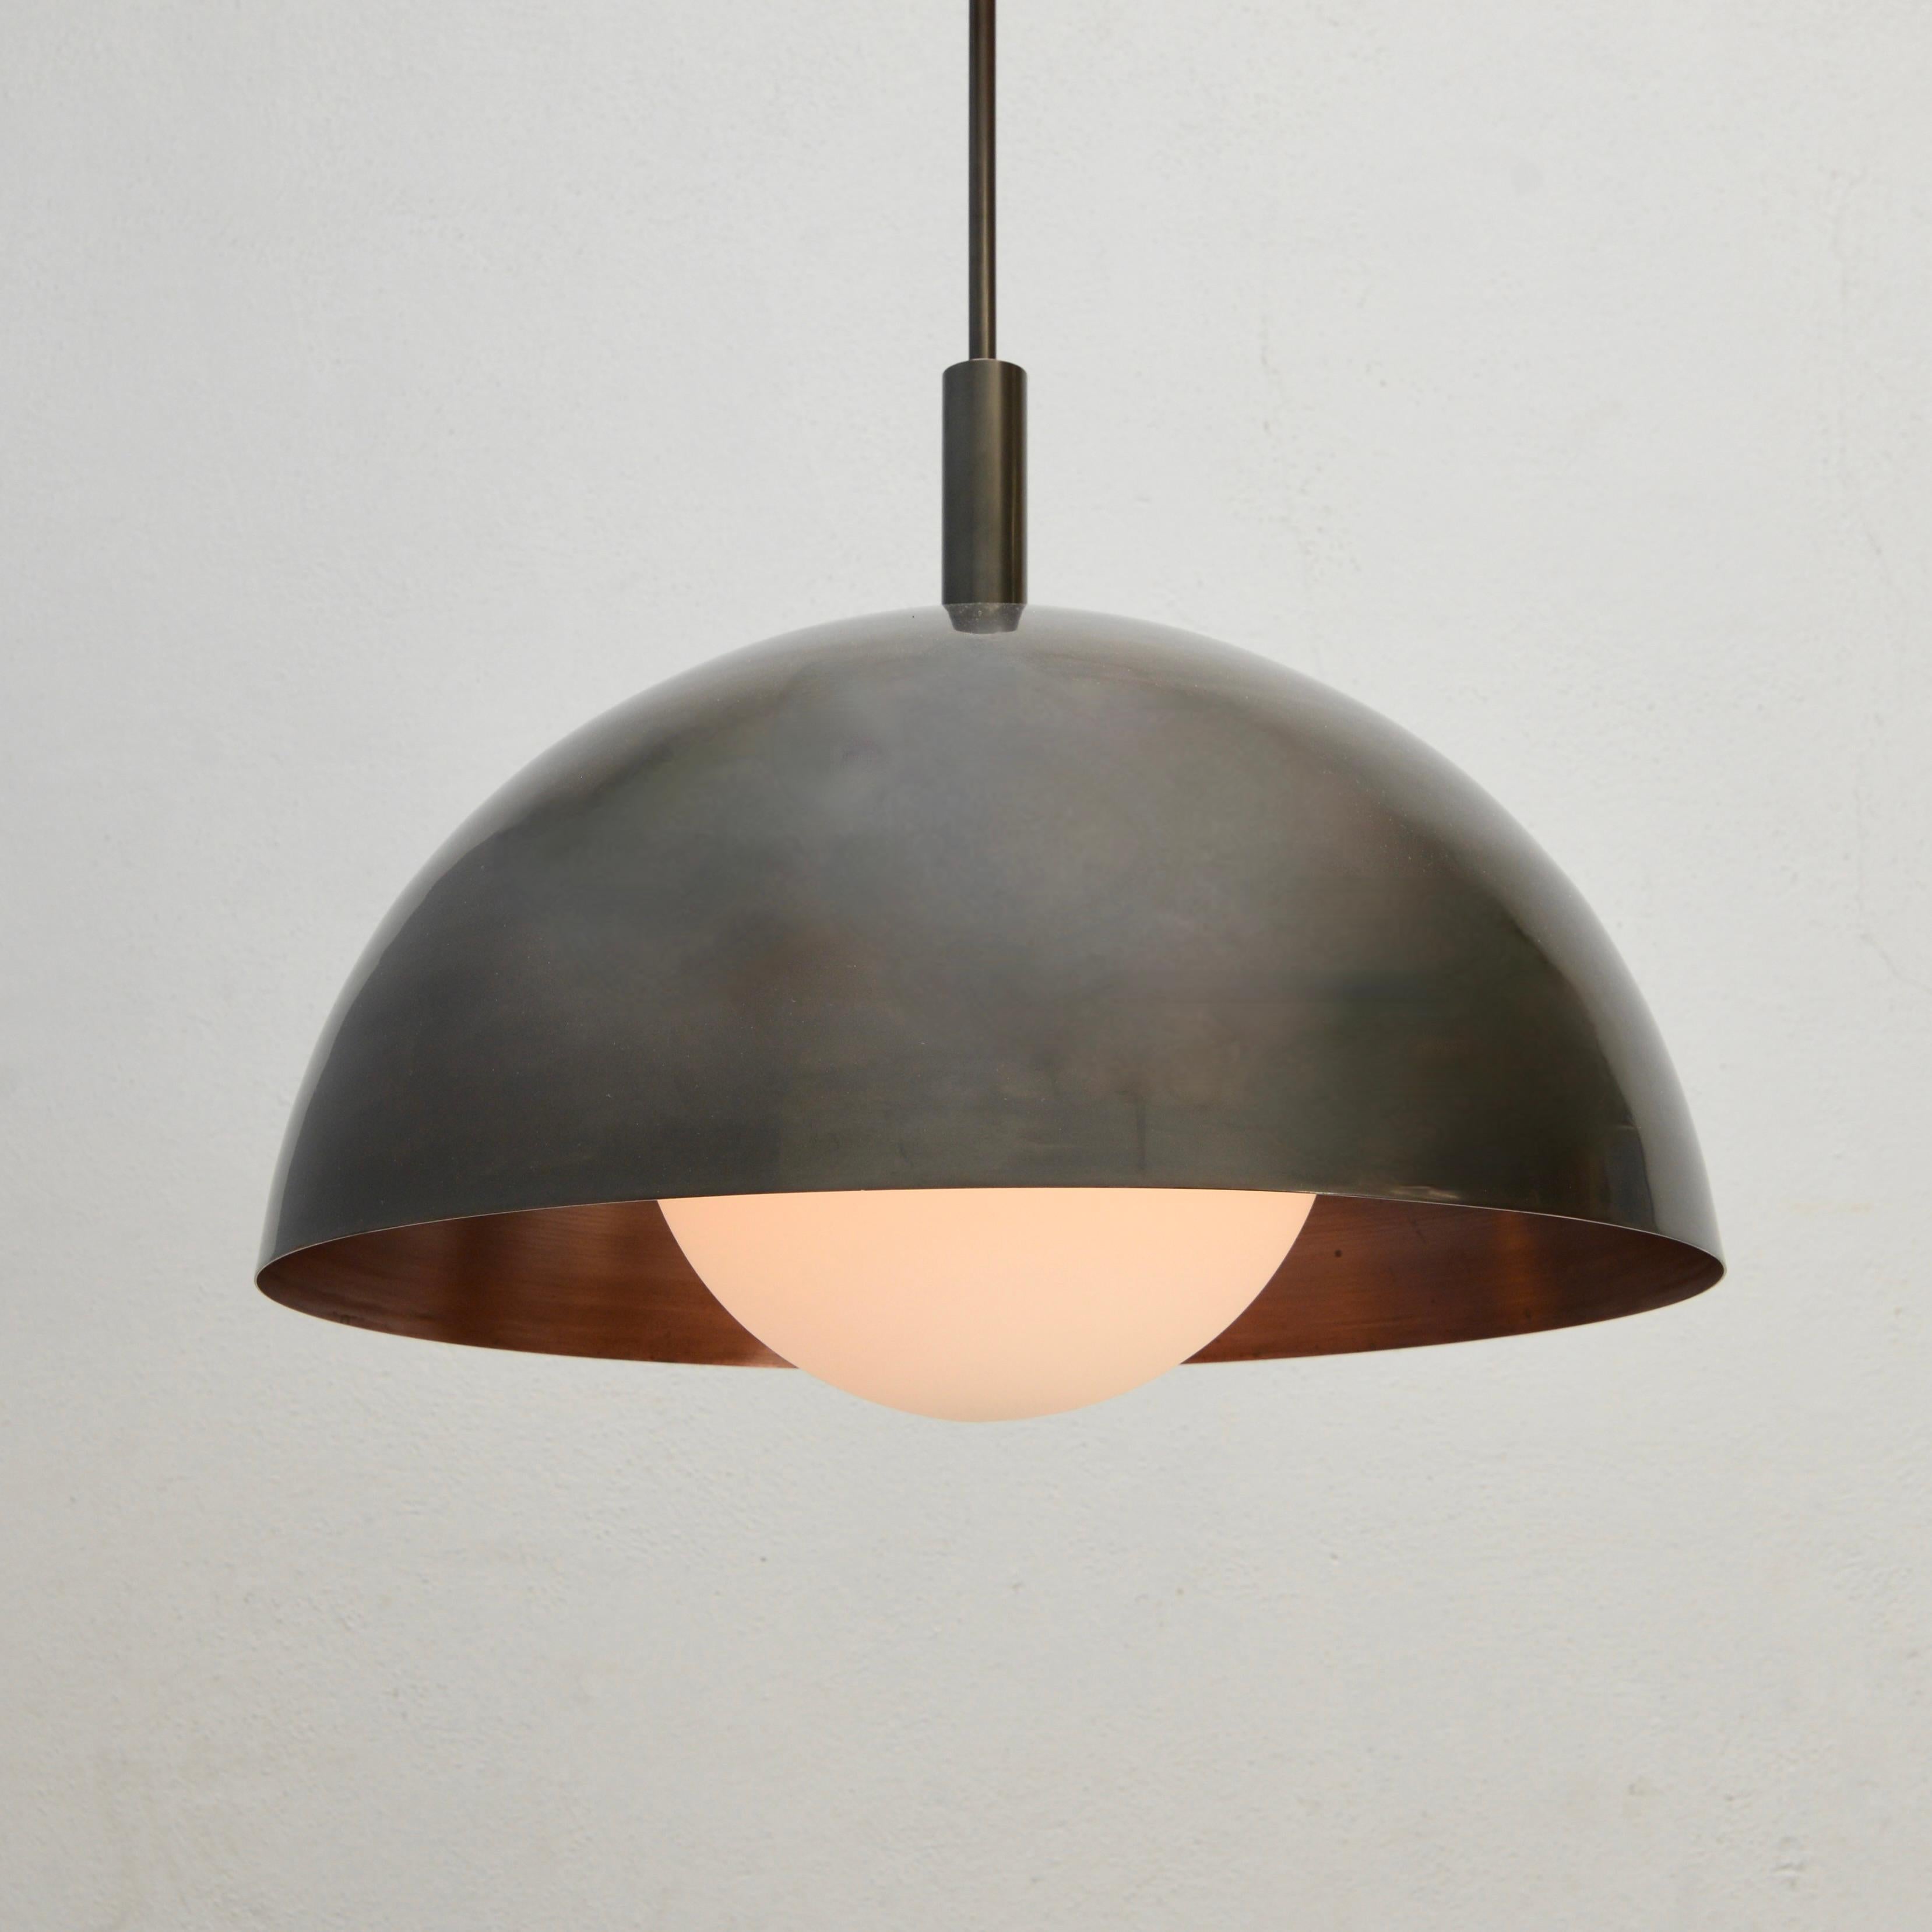 Part of our Lumfardo Luminaires Contemporary Collection, the Large LUdome Copper Pendant is a scale up in dimensions of our LUdome Copper Pendant and is an all copper and glass modern bowl pendant. Made to order. The pendant comes with 1-E26 medium